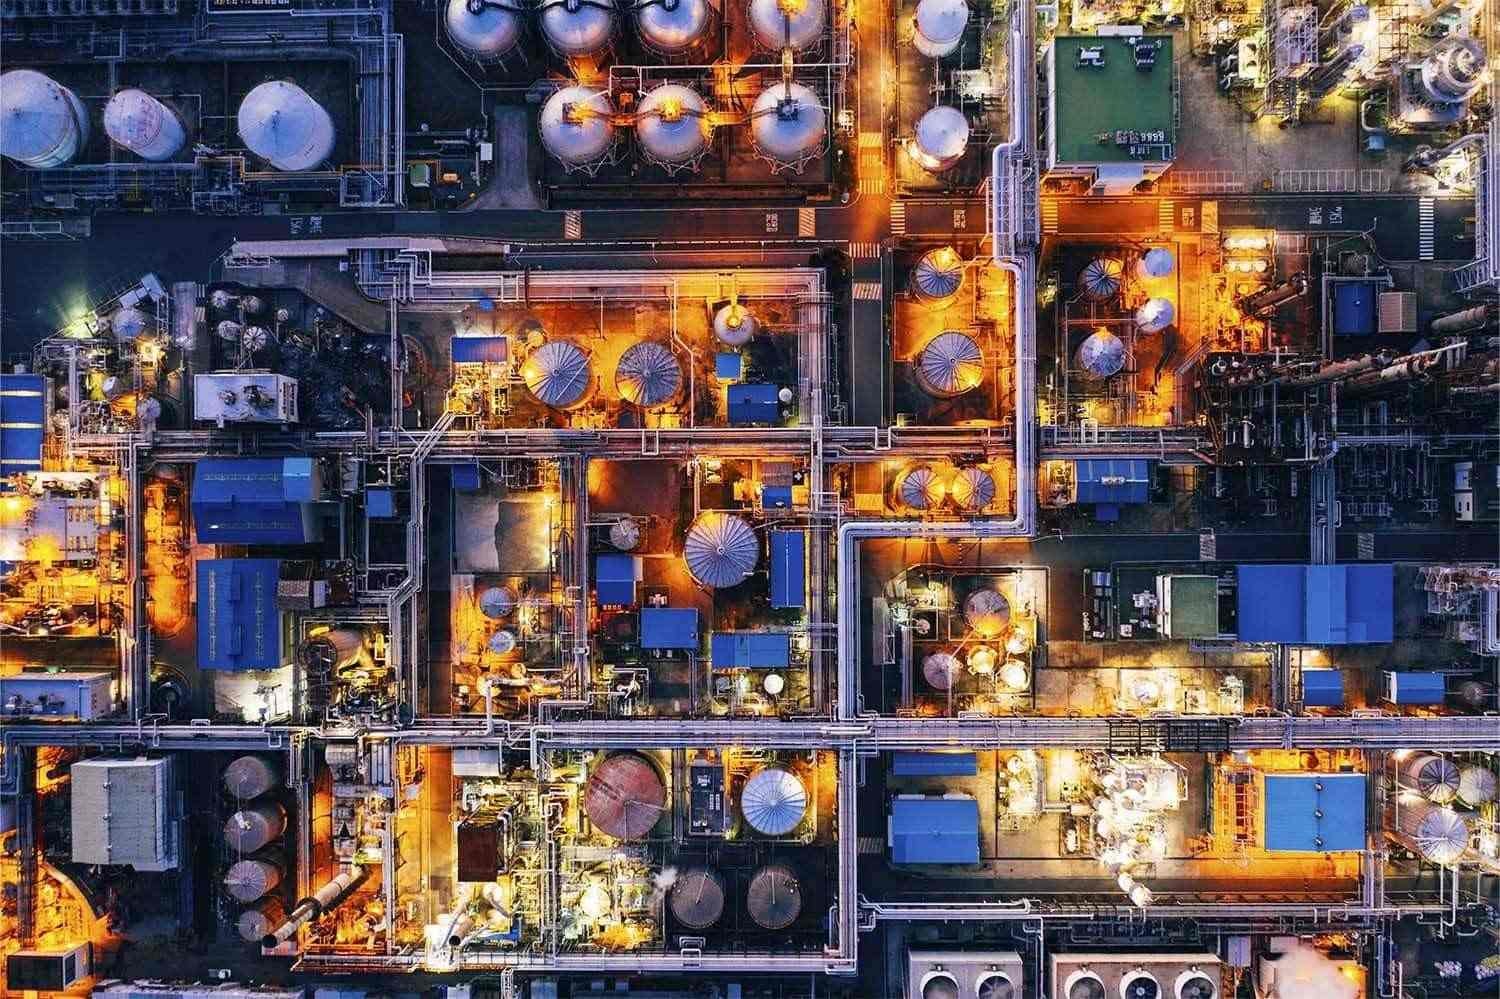 Overhead view of a production plant at night